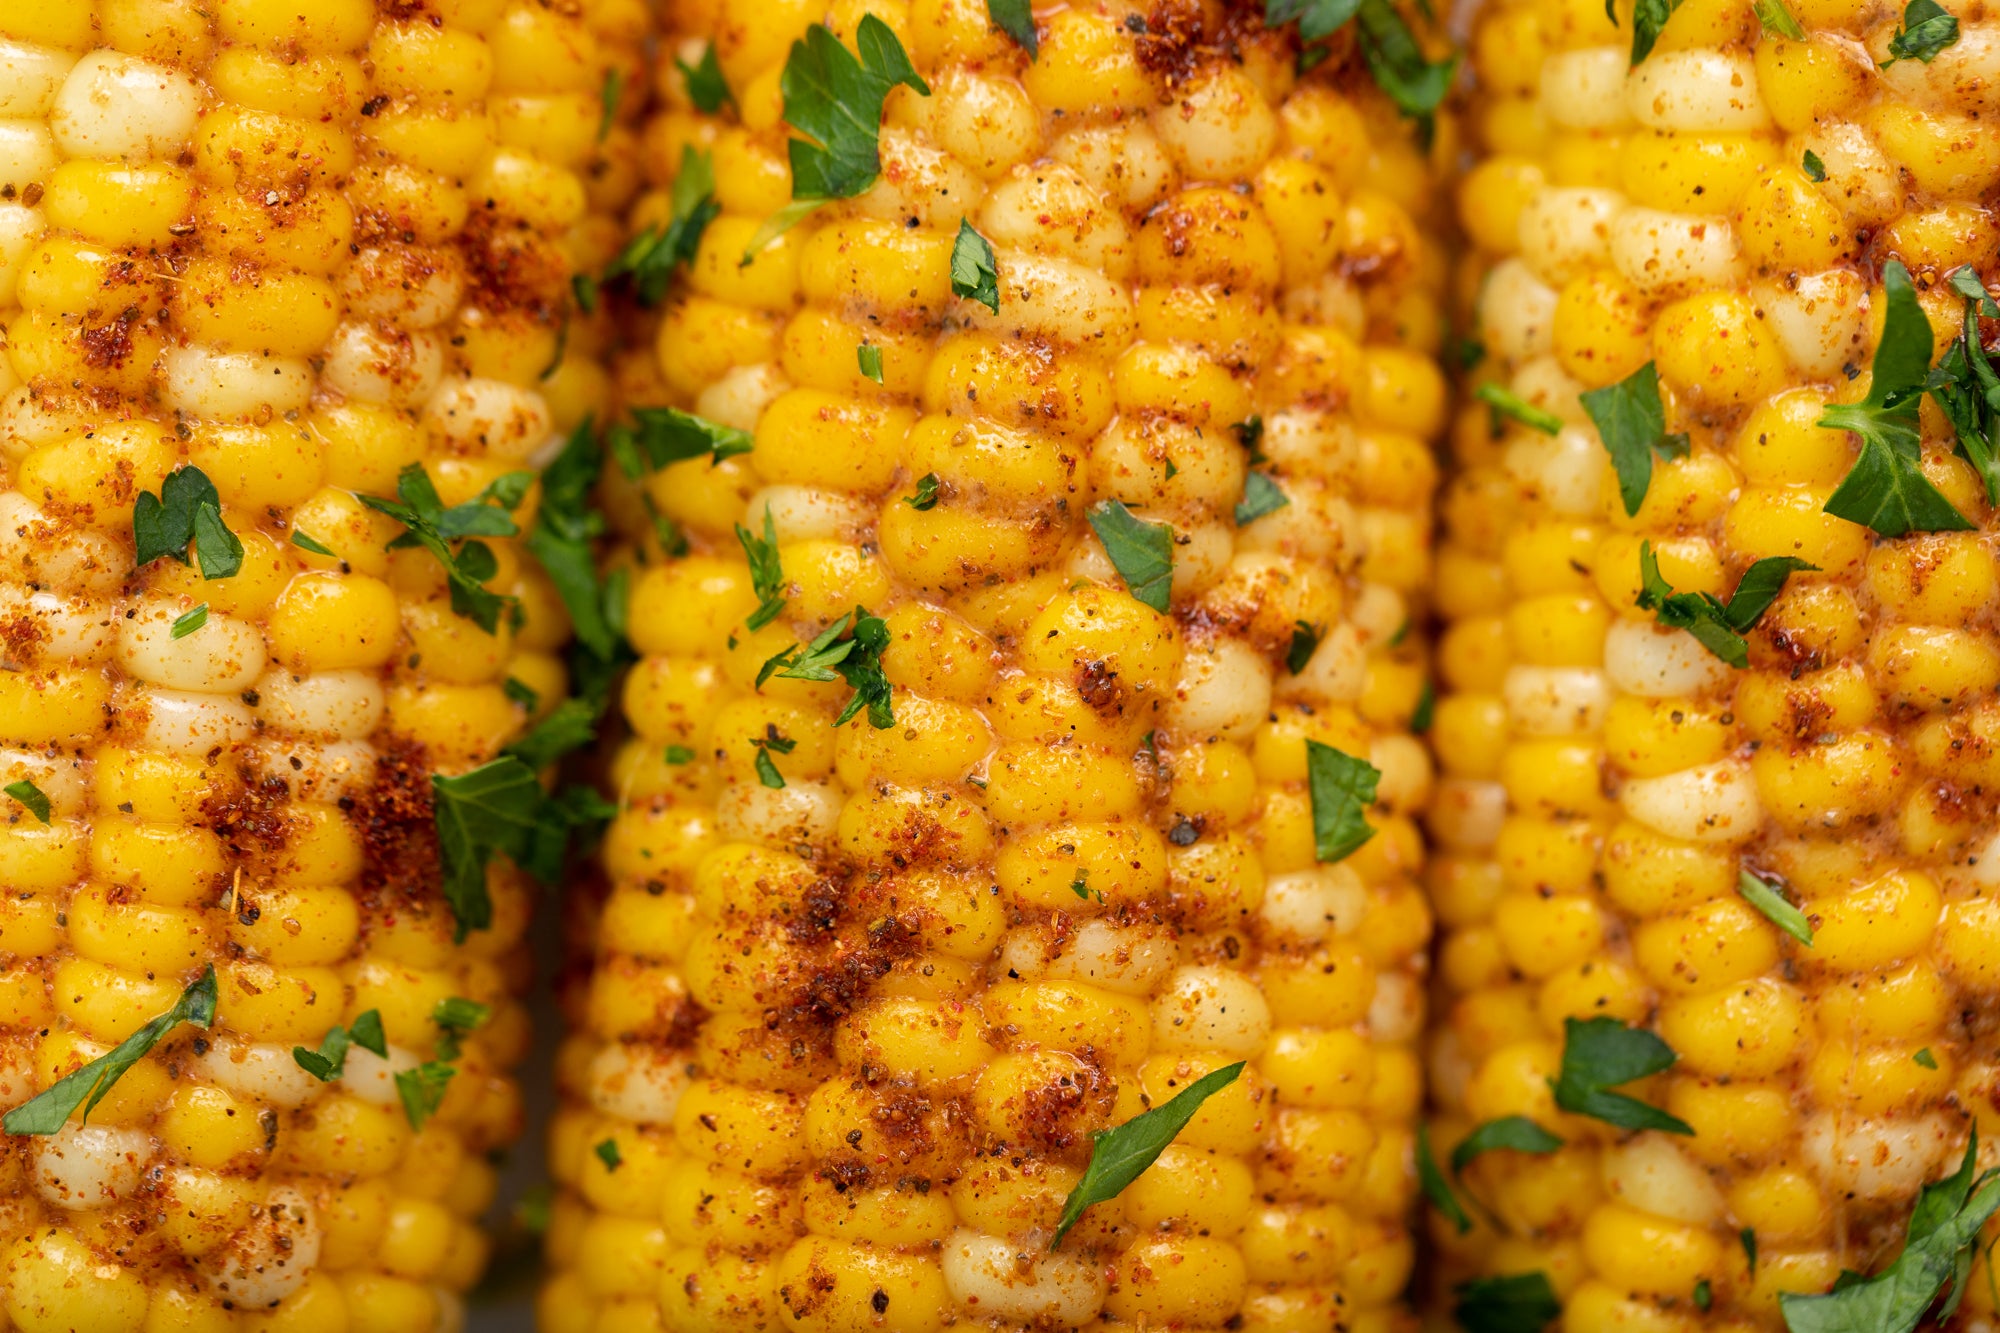 Recipe - BBQ Spice Rub Recipe + Grilled Corn with Spiced Butter